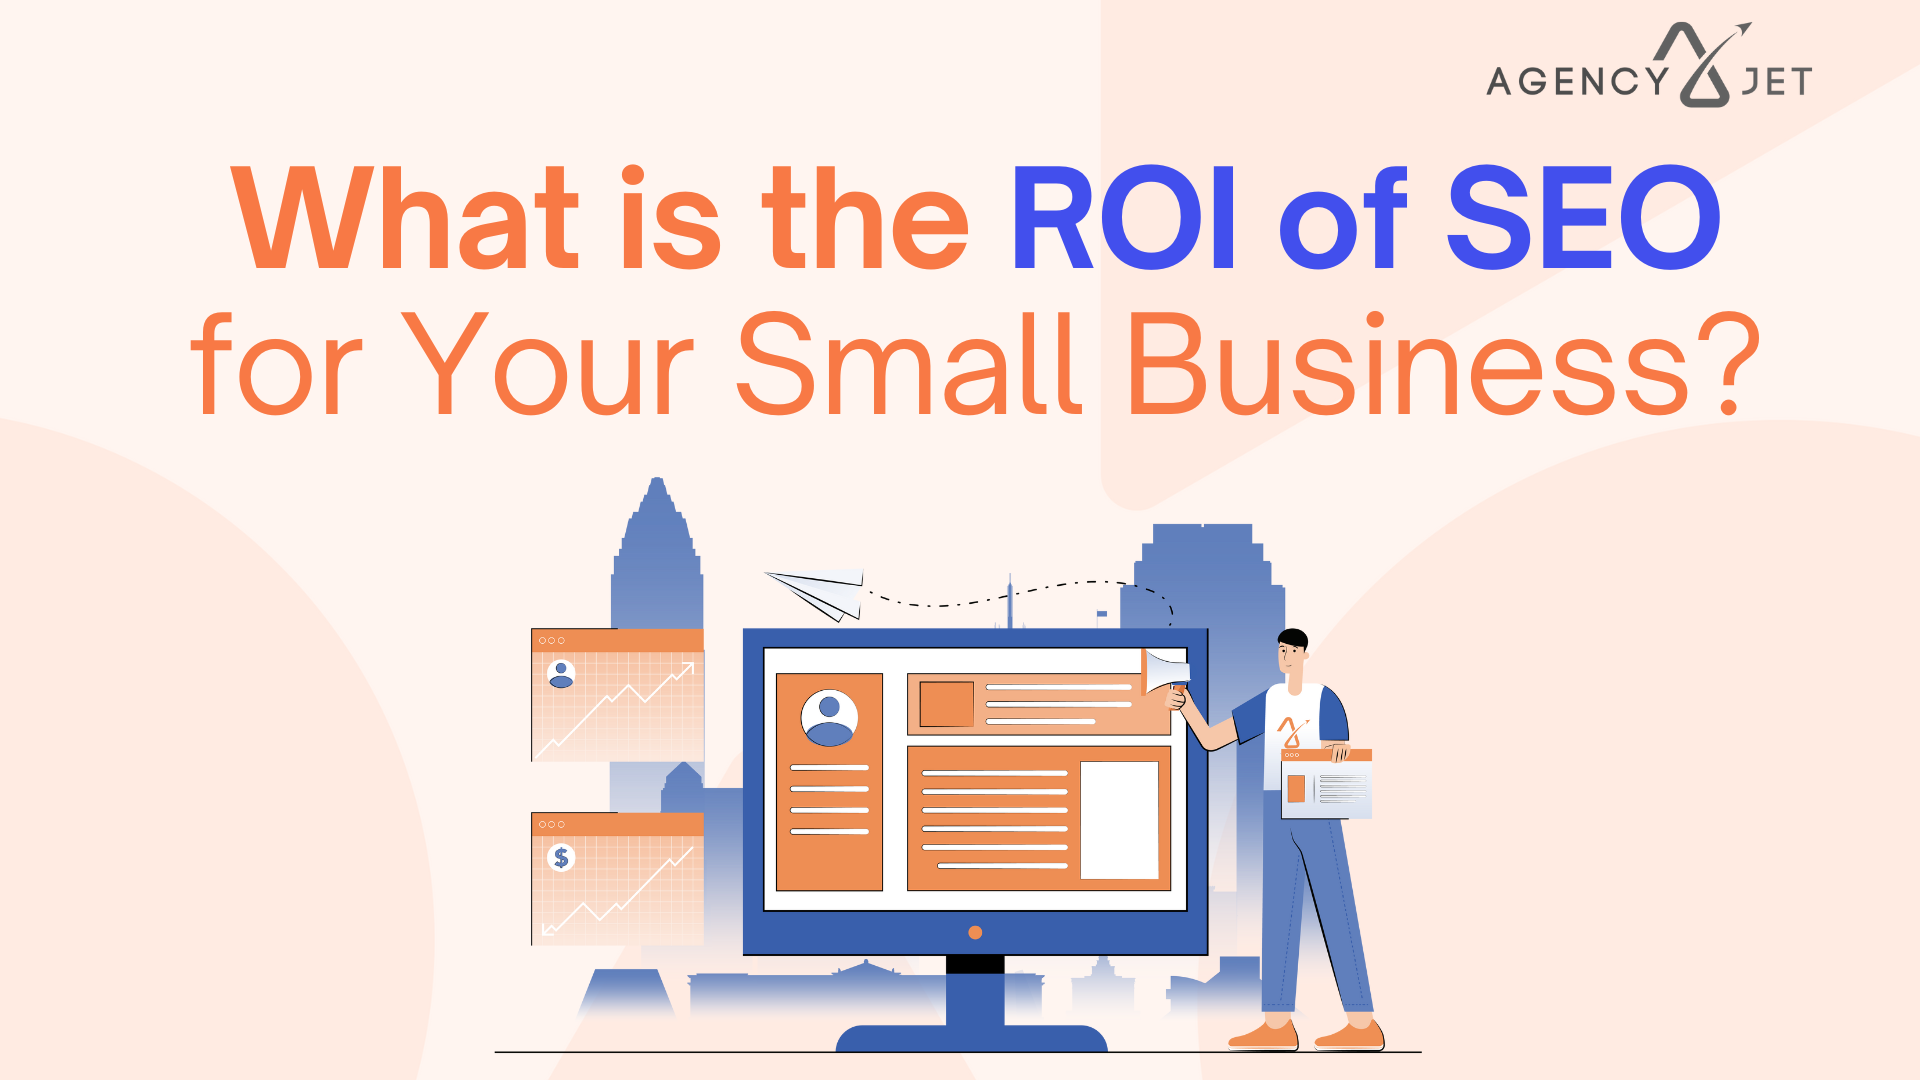 What is the ROI of SEO for Your Small Business - Agency Jet